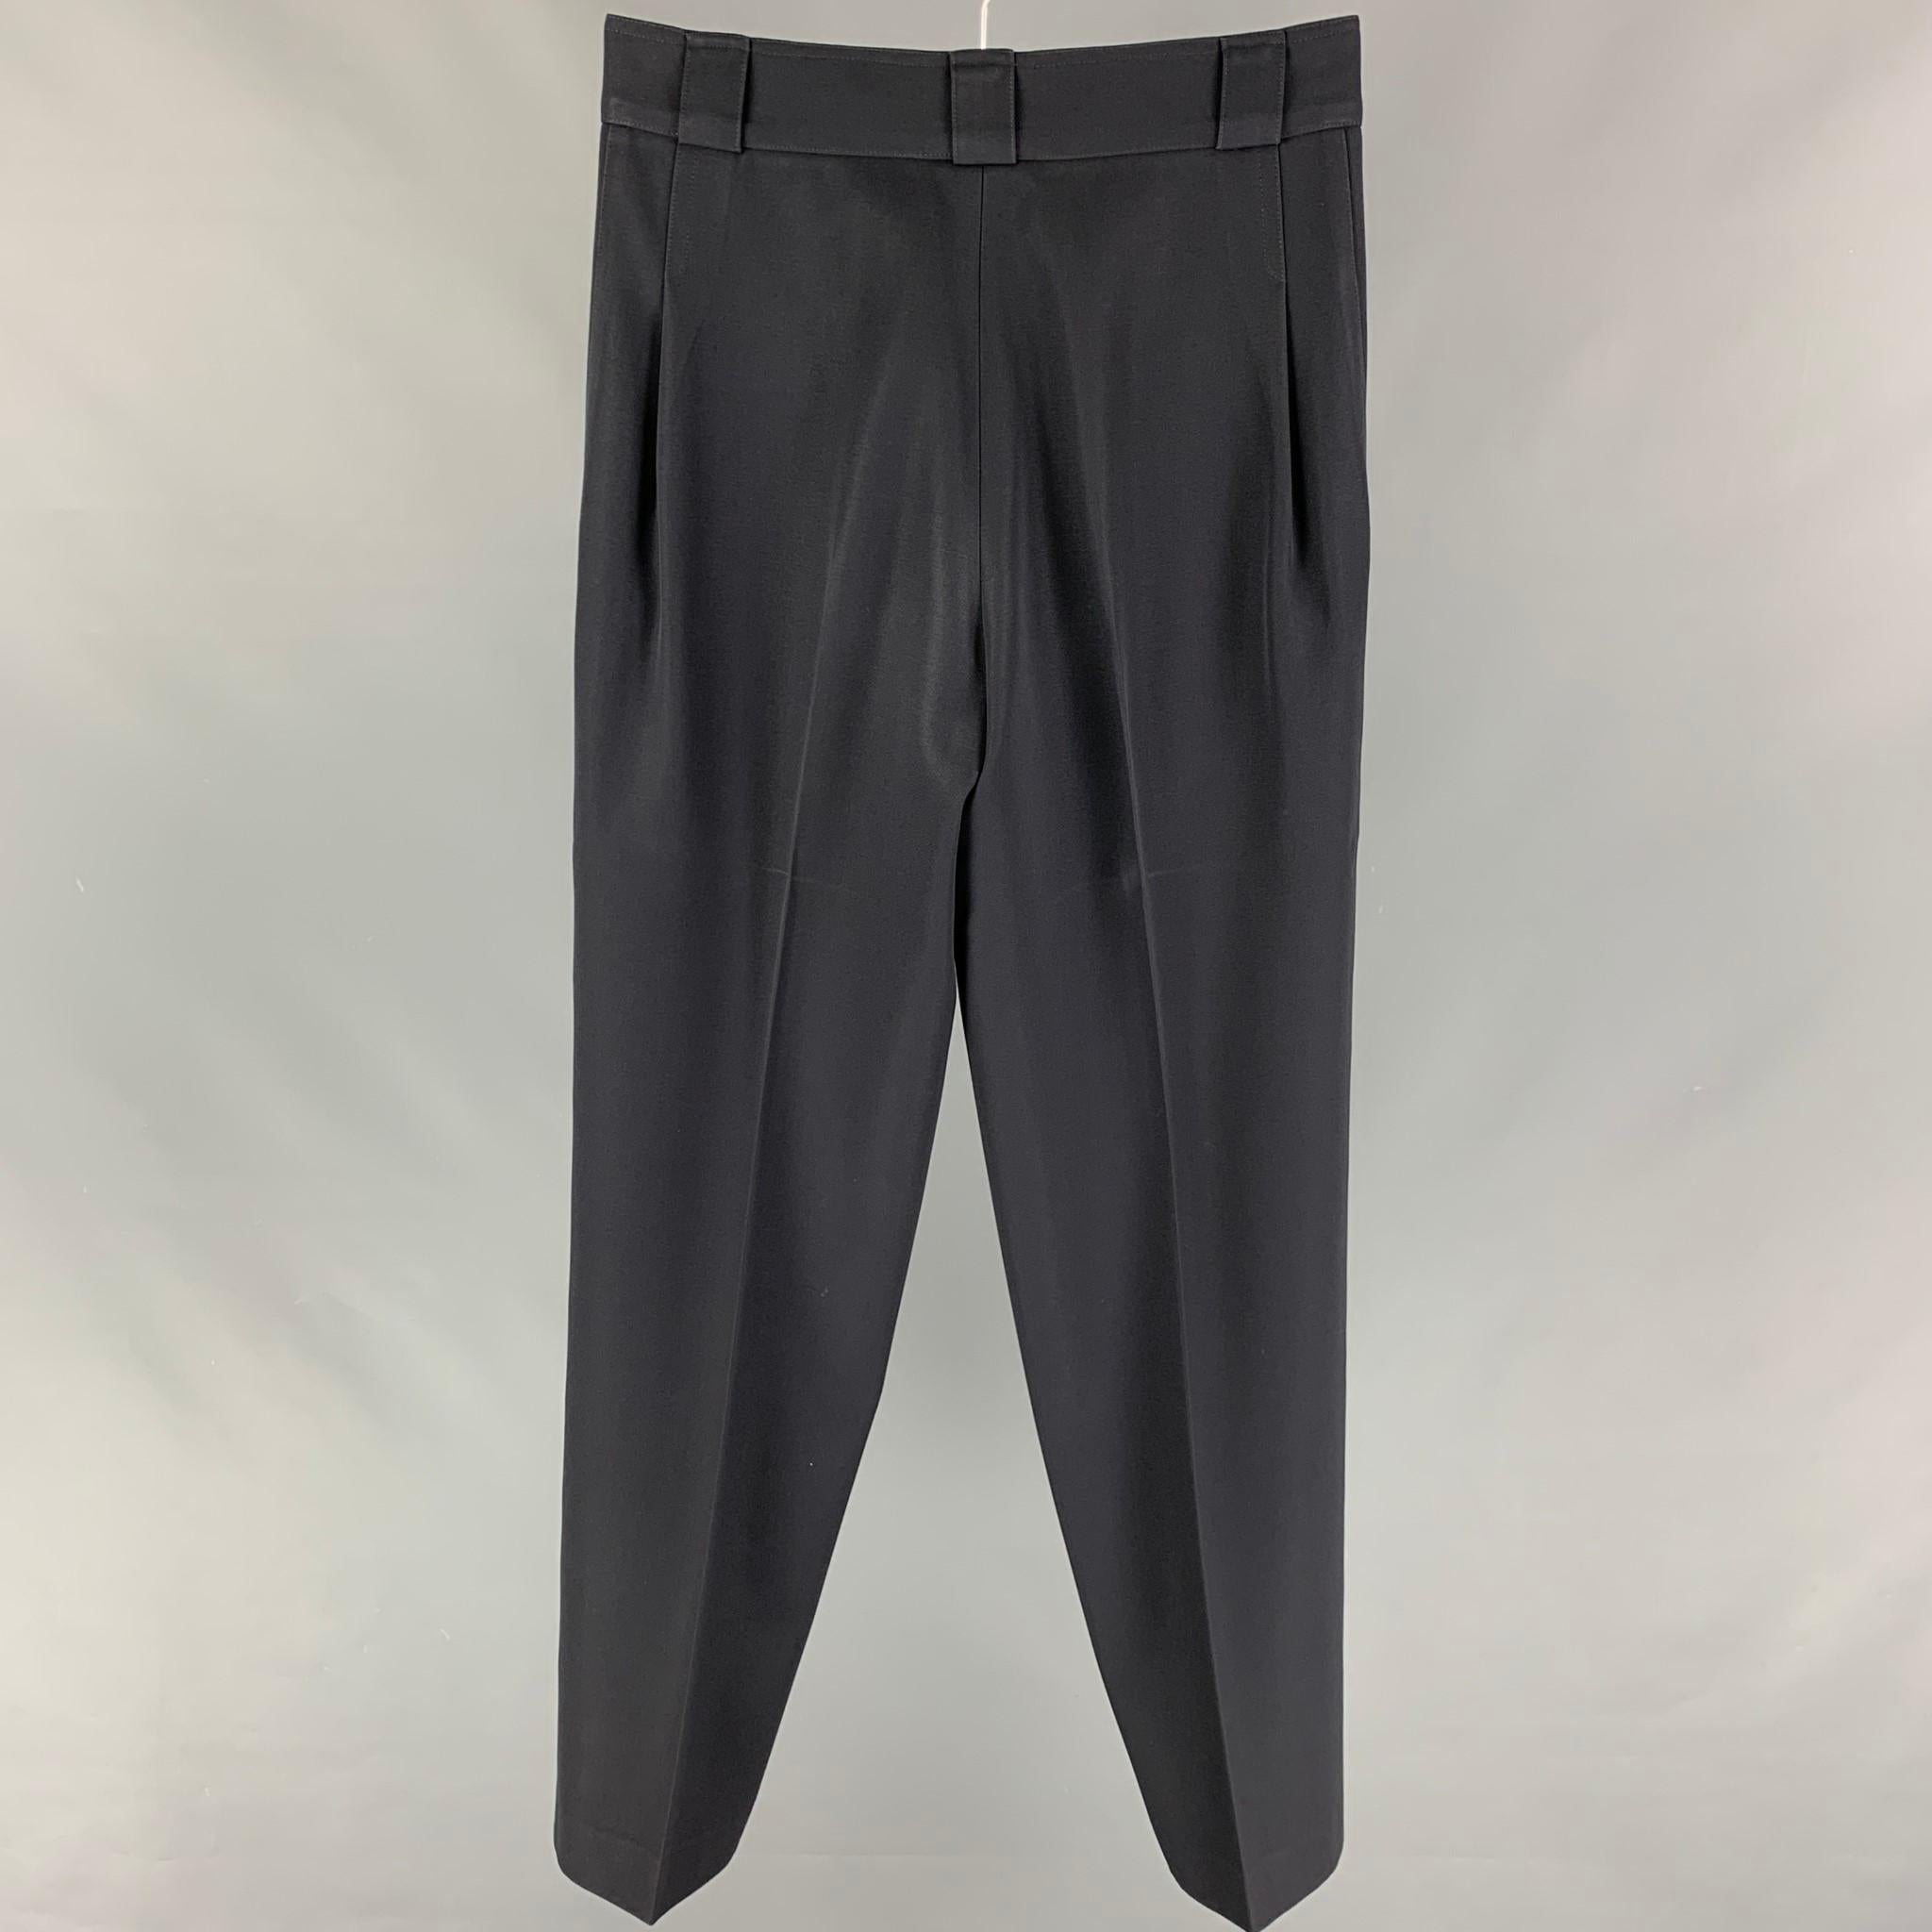 Vintage GIANNI VERSACE dress pants comes in a black wool featuring a pleated front style, high waisted, and a zip fly closure. Made in Italy. 

Very Good Pre-Owned Condition.
Marked: 44

Measurements:

Waist: 30 in.
Rise: 12 in.
Inseam: 32 in. 